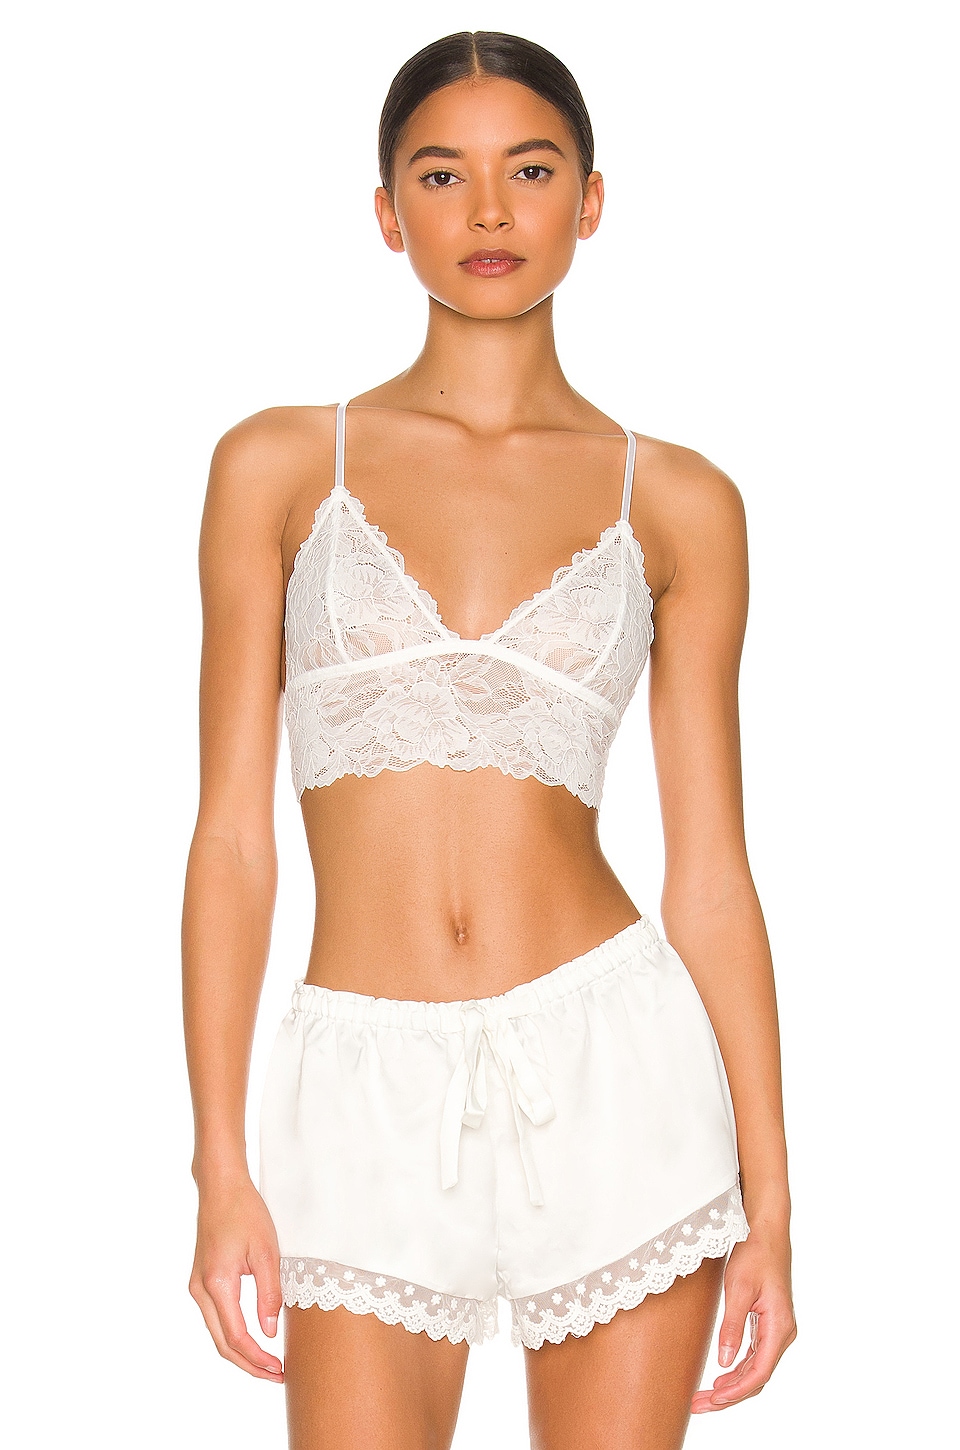 Free People Everyday Lace Bralette in Ivory